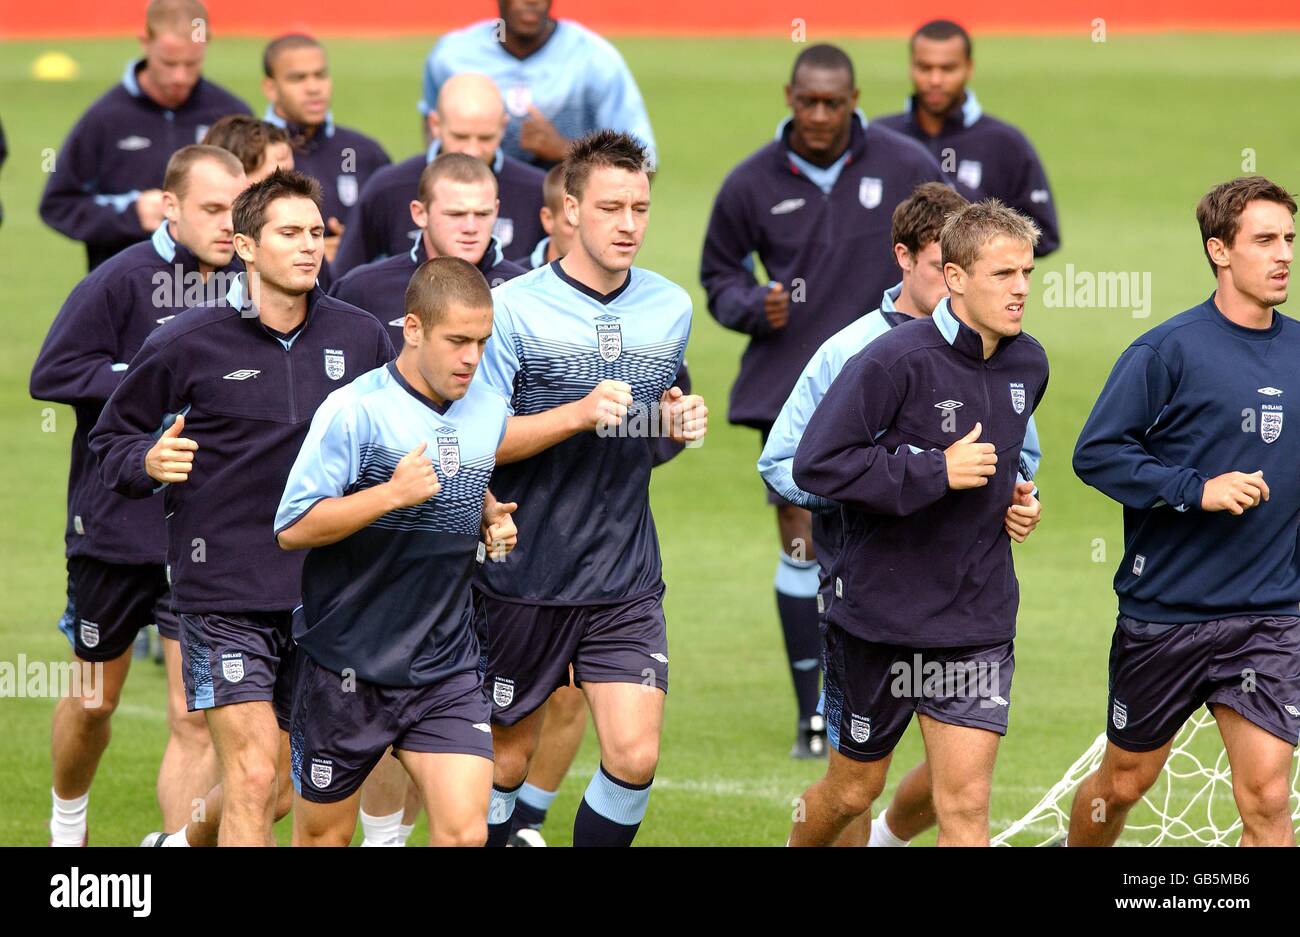 England players train at Manchester United's Cliff Training Ground (in the foreground l-r Danny Murphy, Frank Lampard, Joe Cole, Wayne Rooney, John Terry, Phil Neville and Gary Neville) Stock Photo